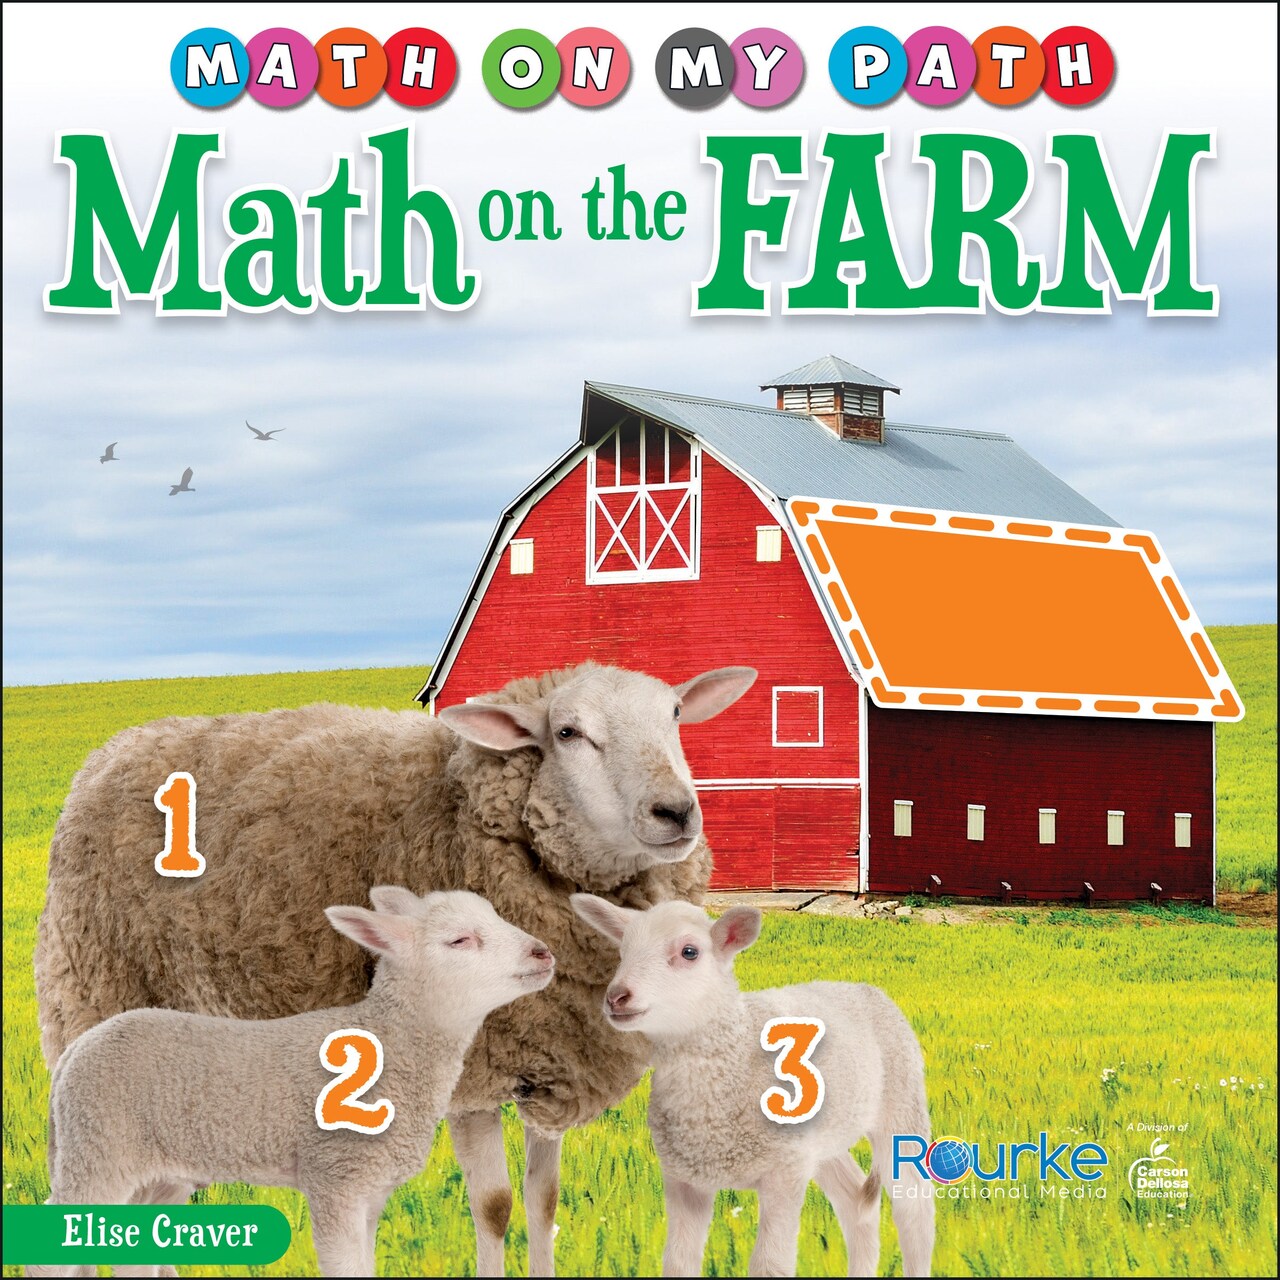 Rourke Educational Media Math on my Path: Math on the Farm&#x2014;Counting, Sorting, Comparing, and Shape Recognition Fun on a Farm, Grades K-2 Leveled Readers (24 pgs) Reader